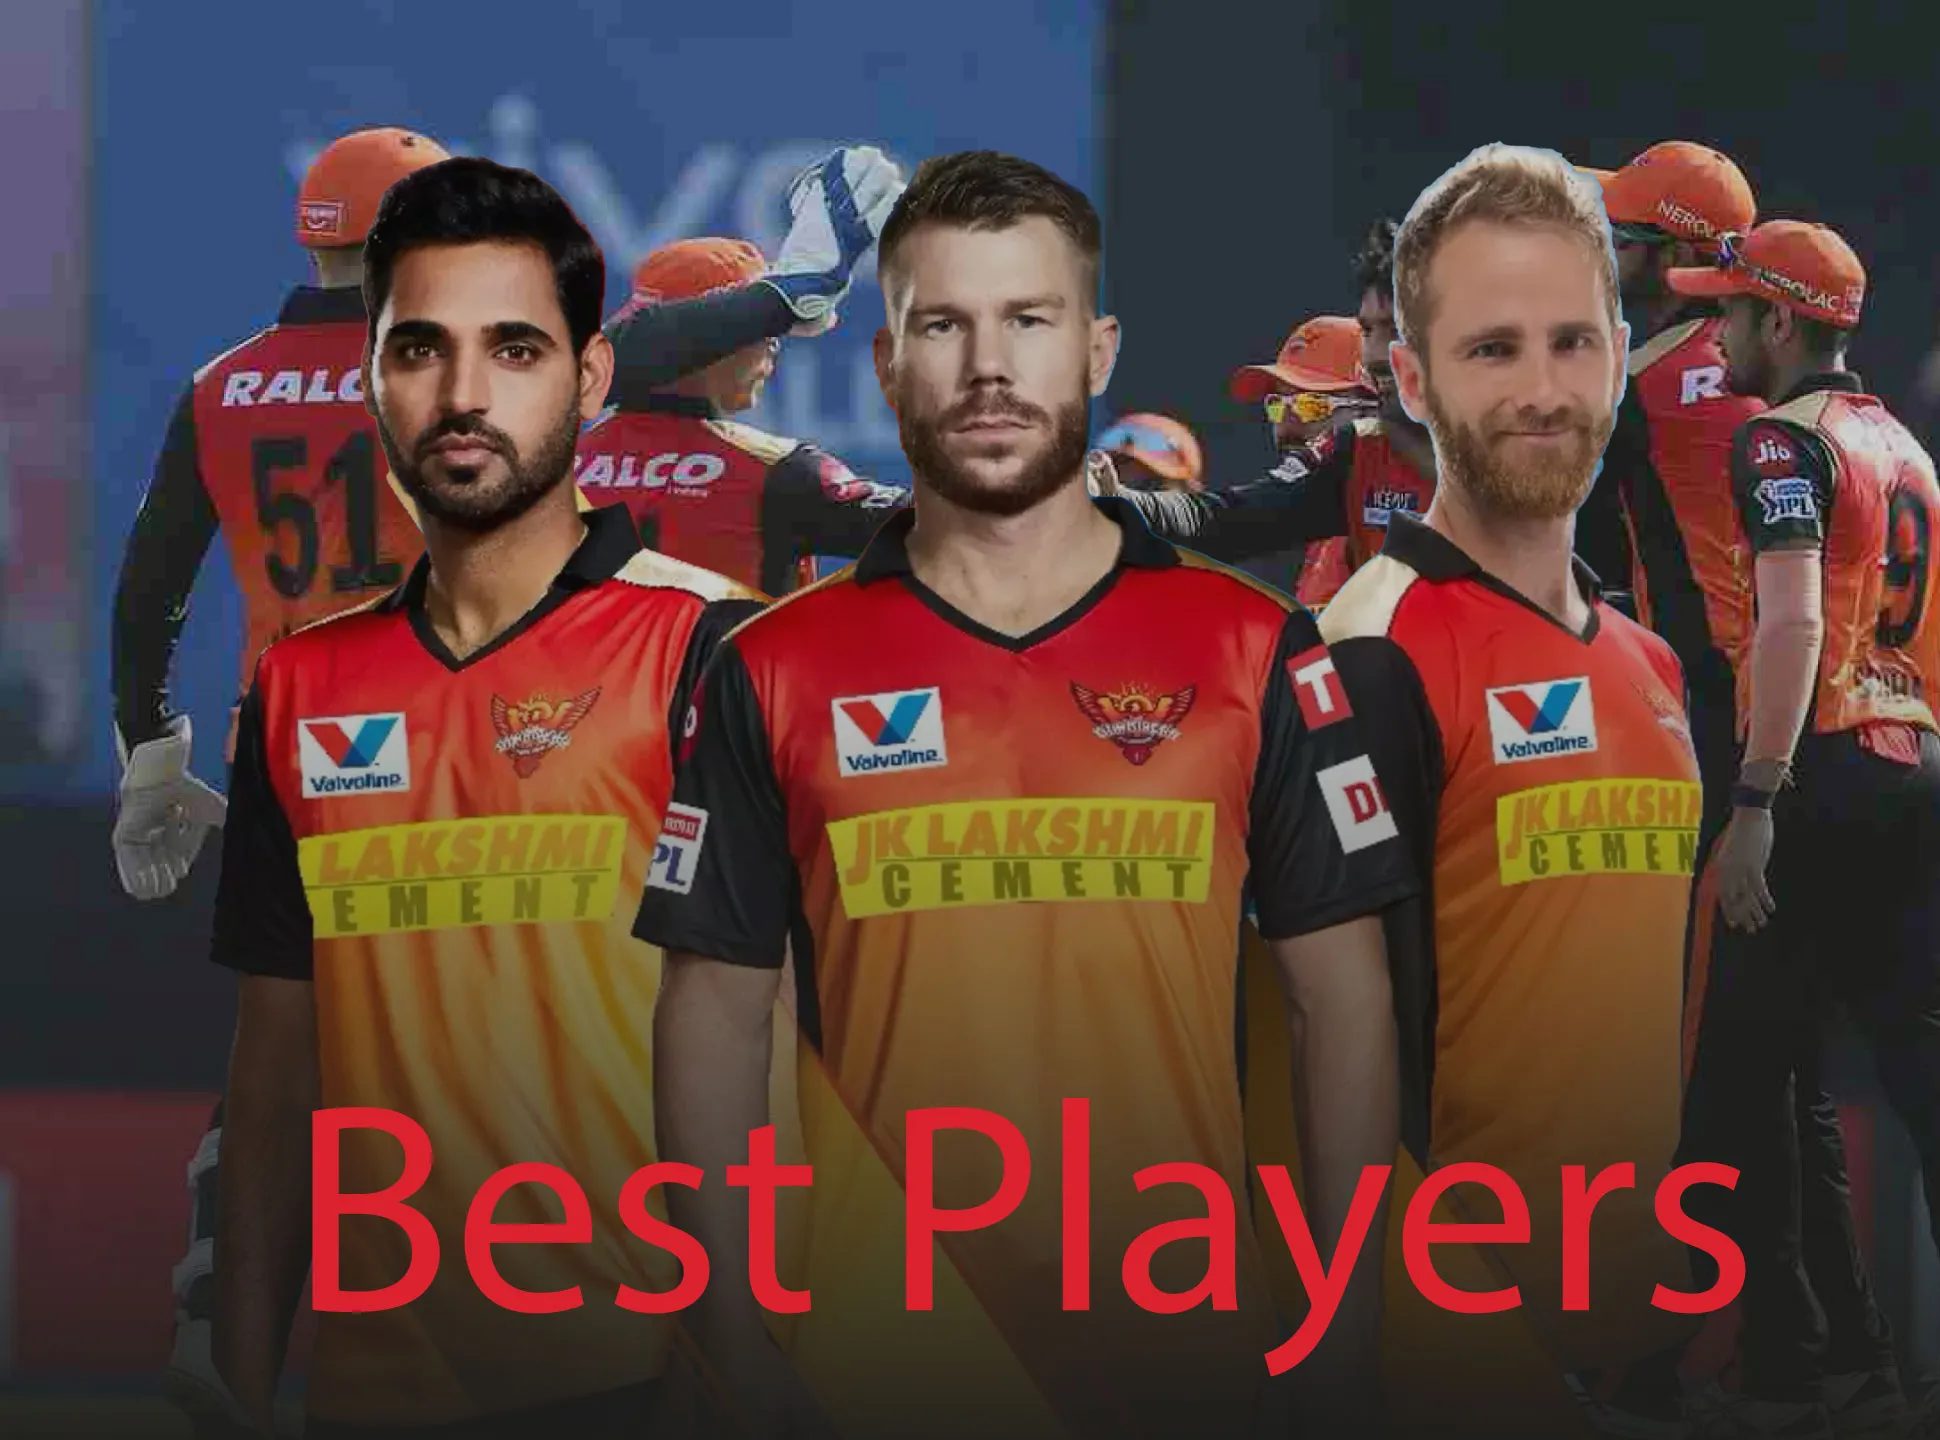 Place bets on these players to win more during the IPL 2023.